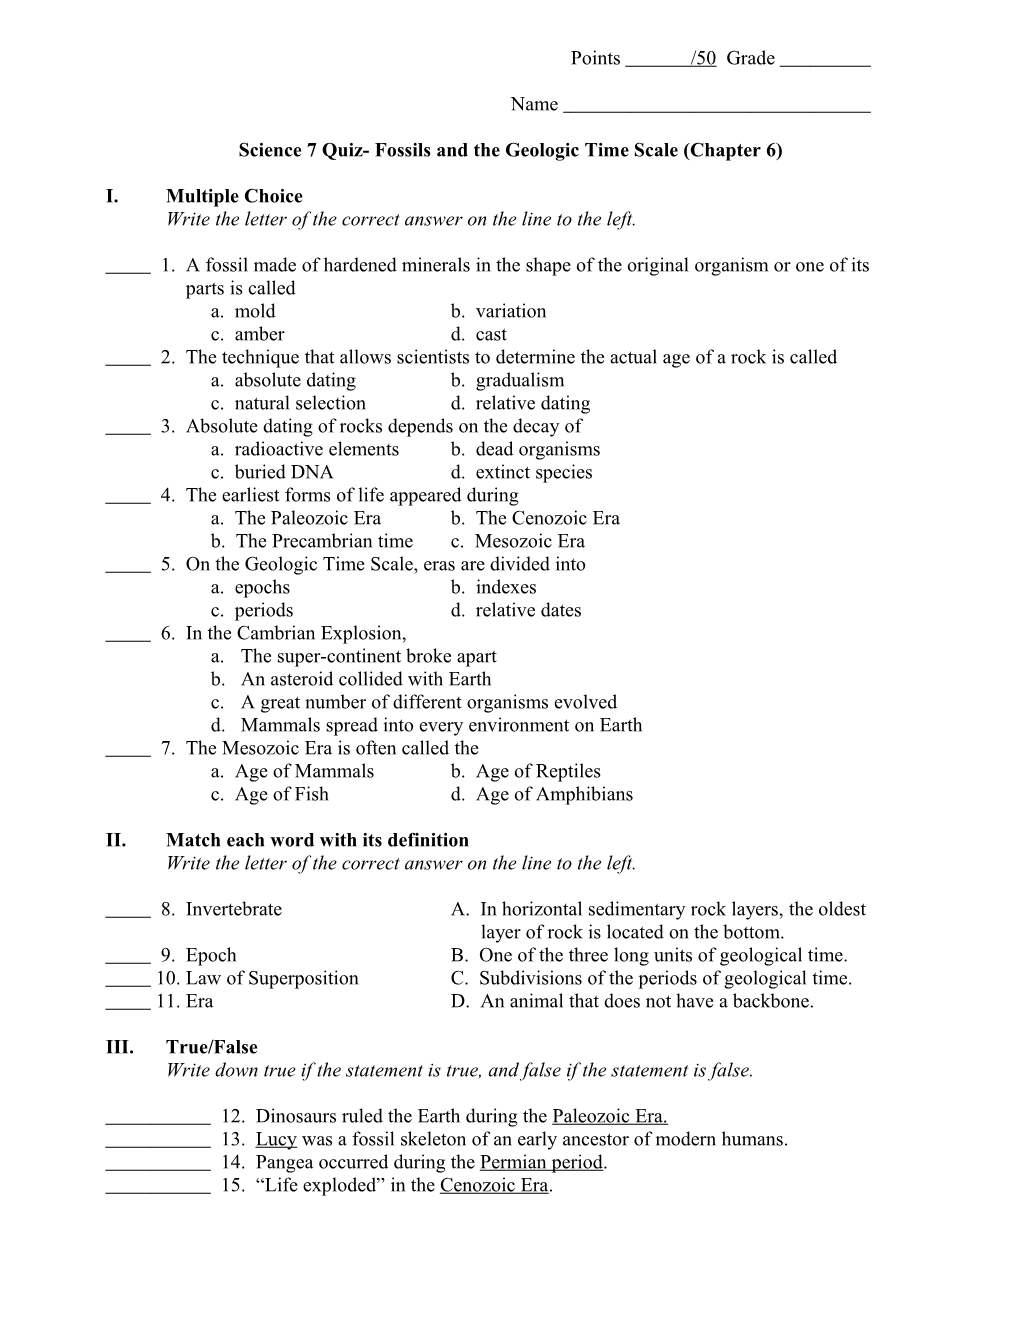 Science 7 Quiz- Fossils and the Geologic Time Scale (Chapter 6)